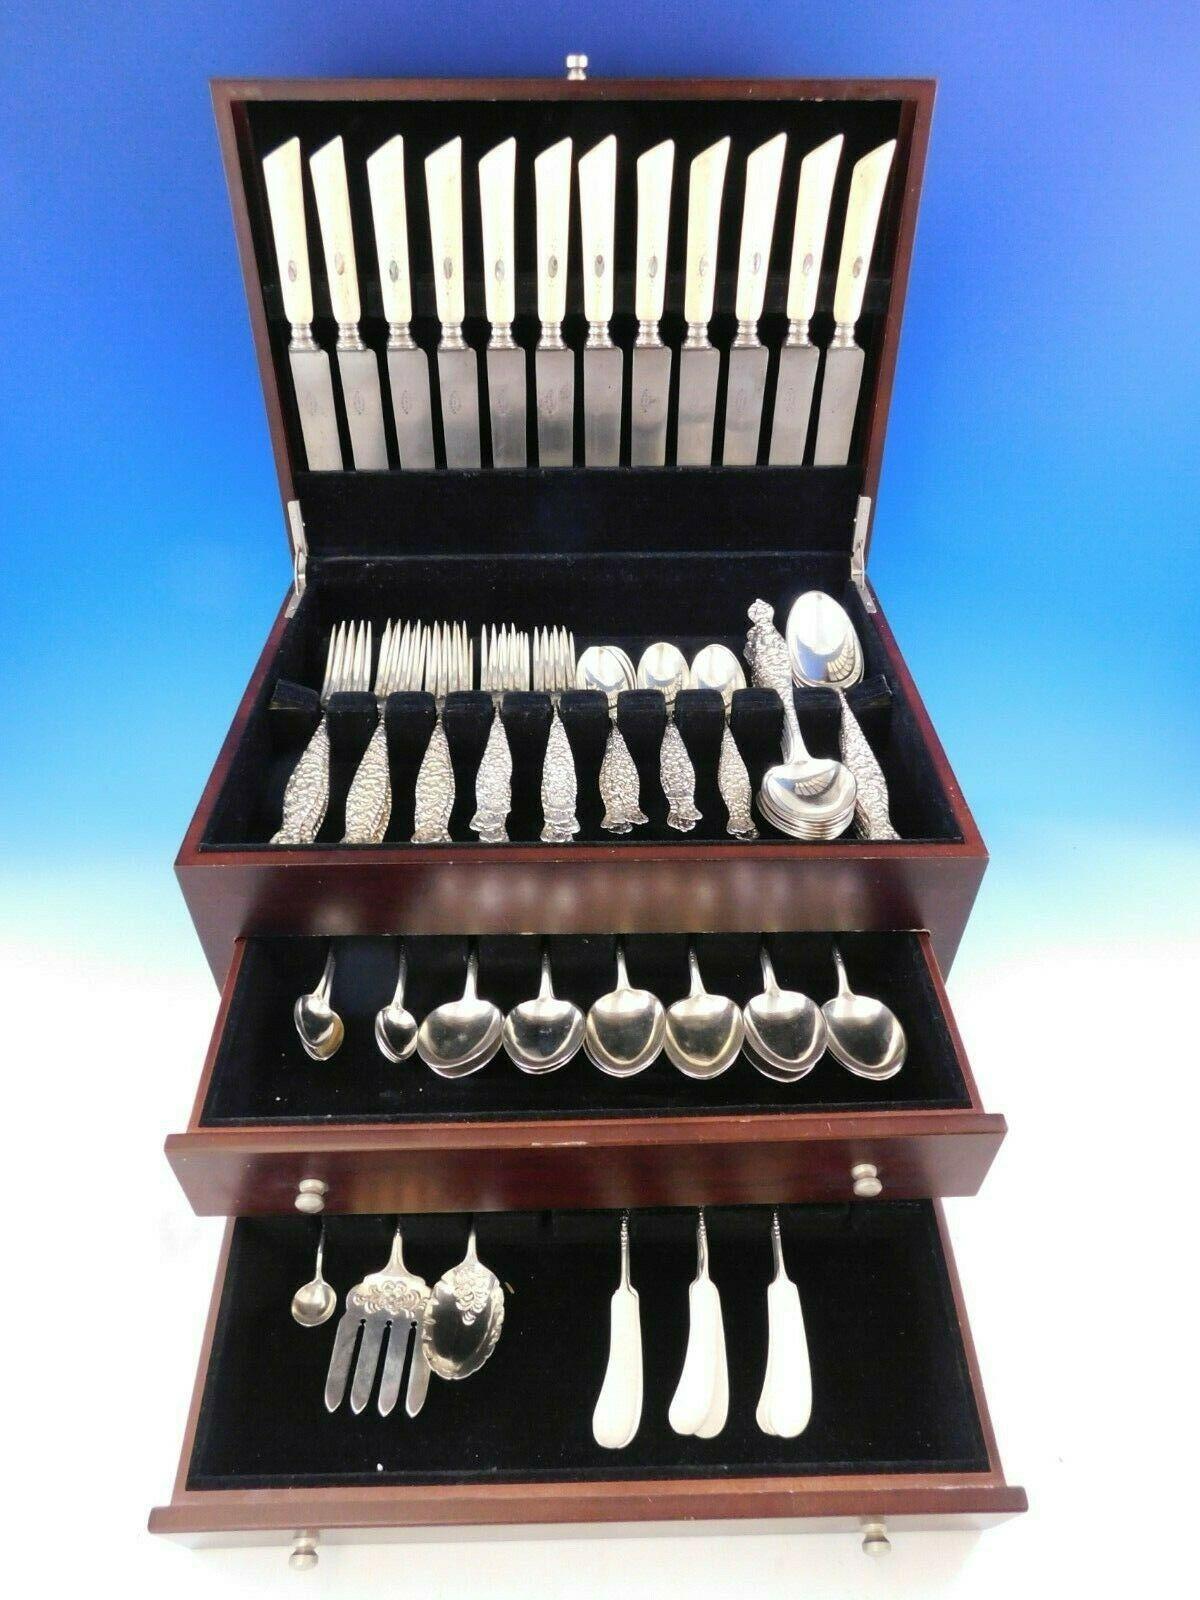 Scarce No. 3 by Duhme, circa 1885, sterling silver flatware set - 92 pieces (including 12 faux ivory handle dinner knives). This rare service includes:

12 dinner size knives, 9 1/2